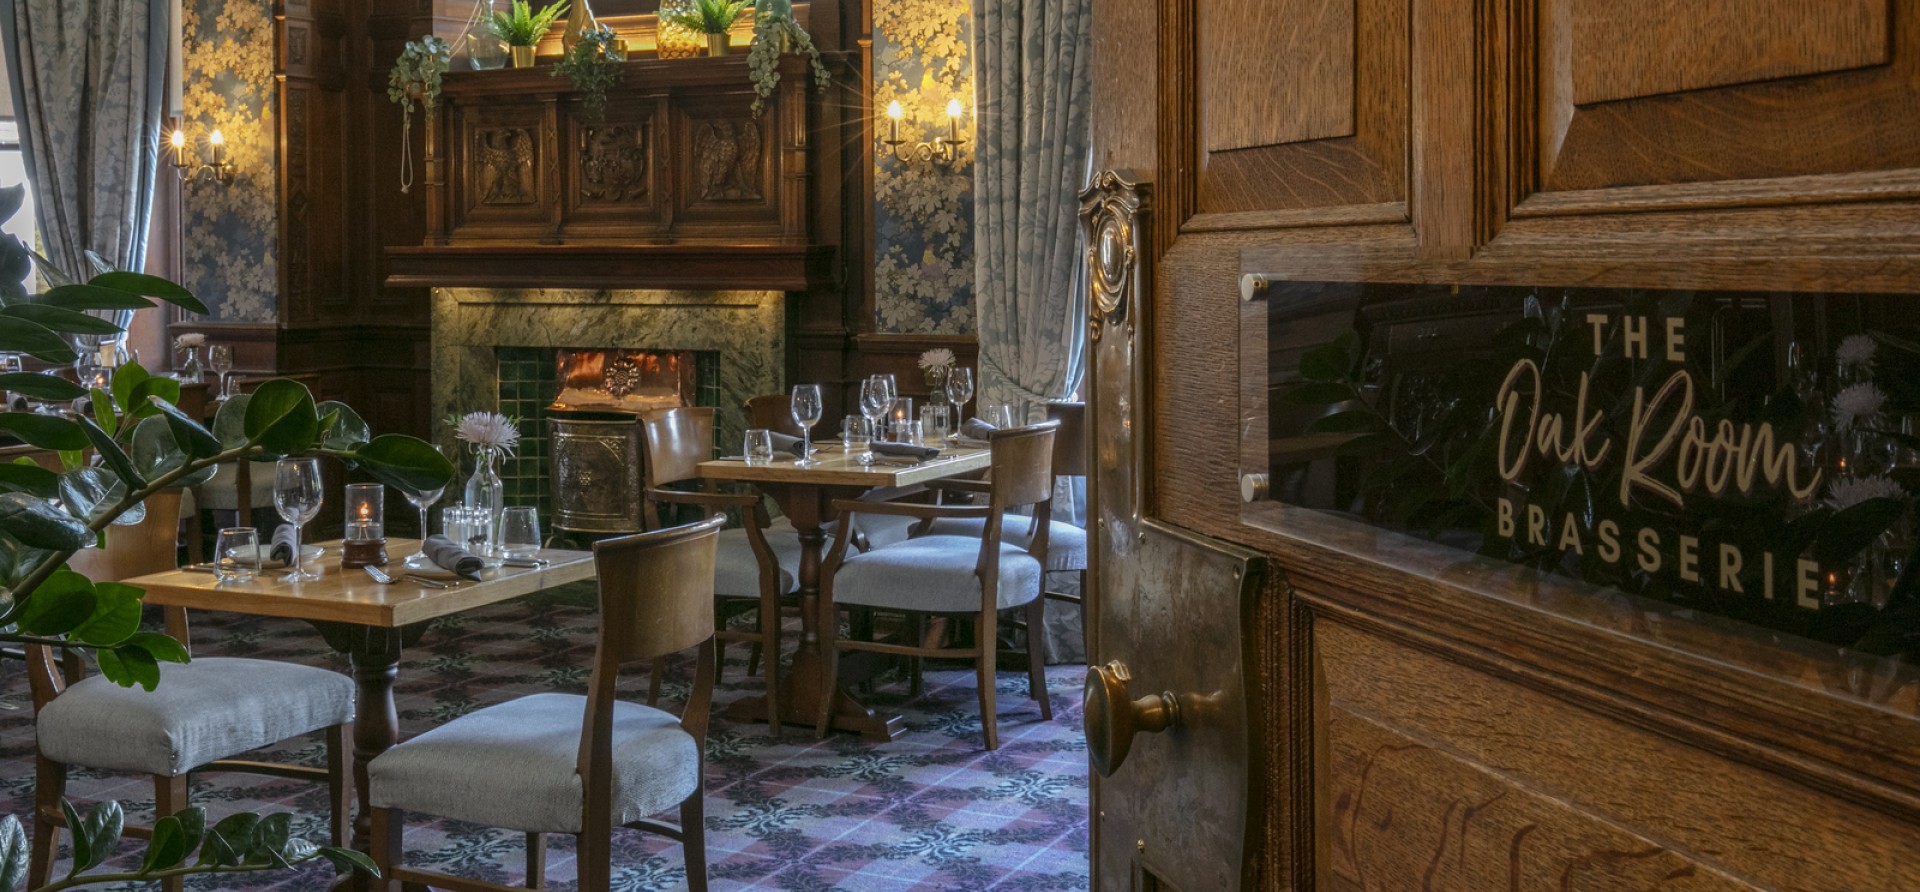 The Oak Room Brasserie  Dine at Moor Hall Hotel & Spa in Sutton Coldfield